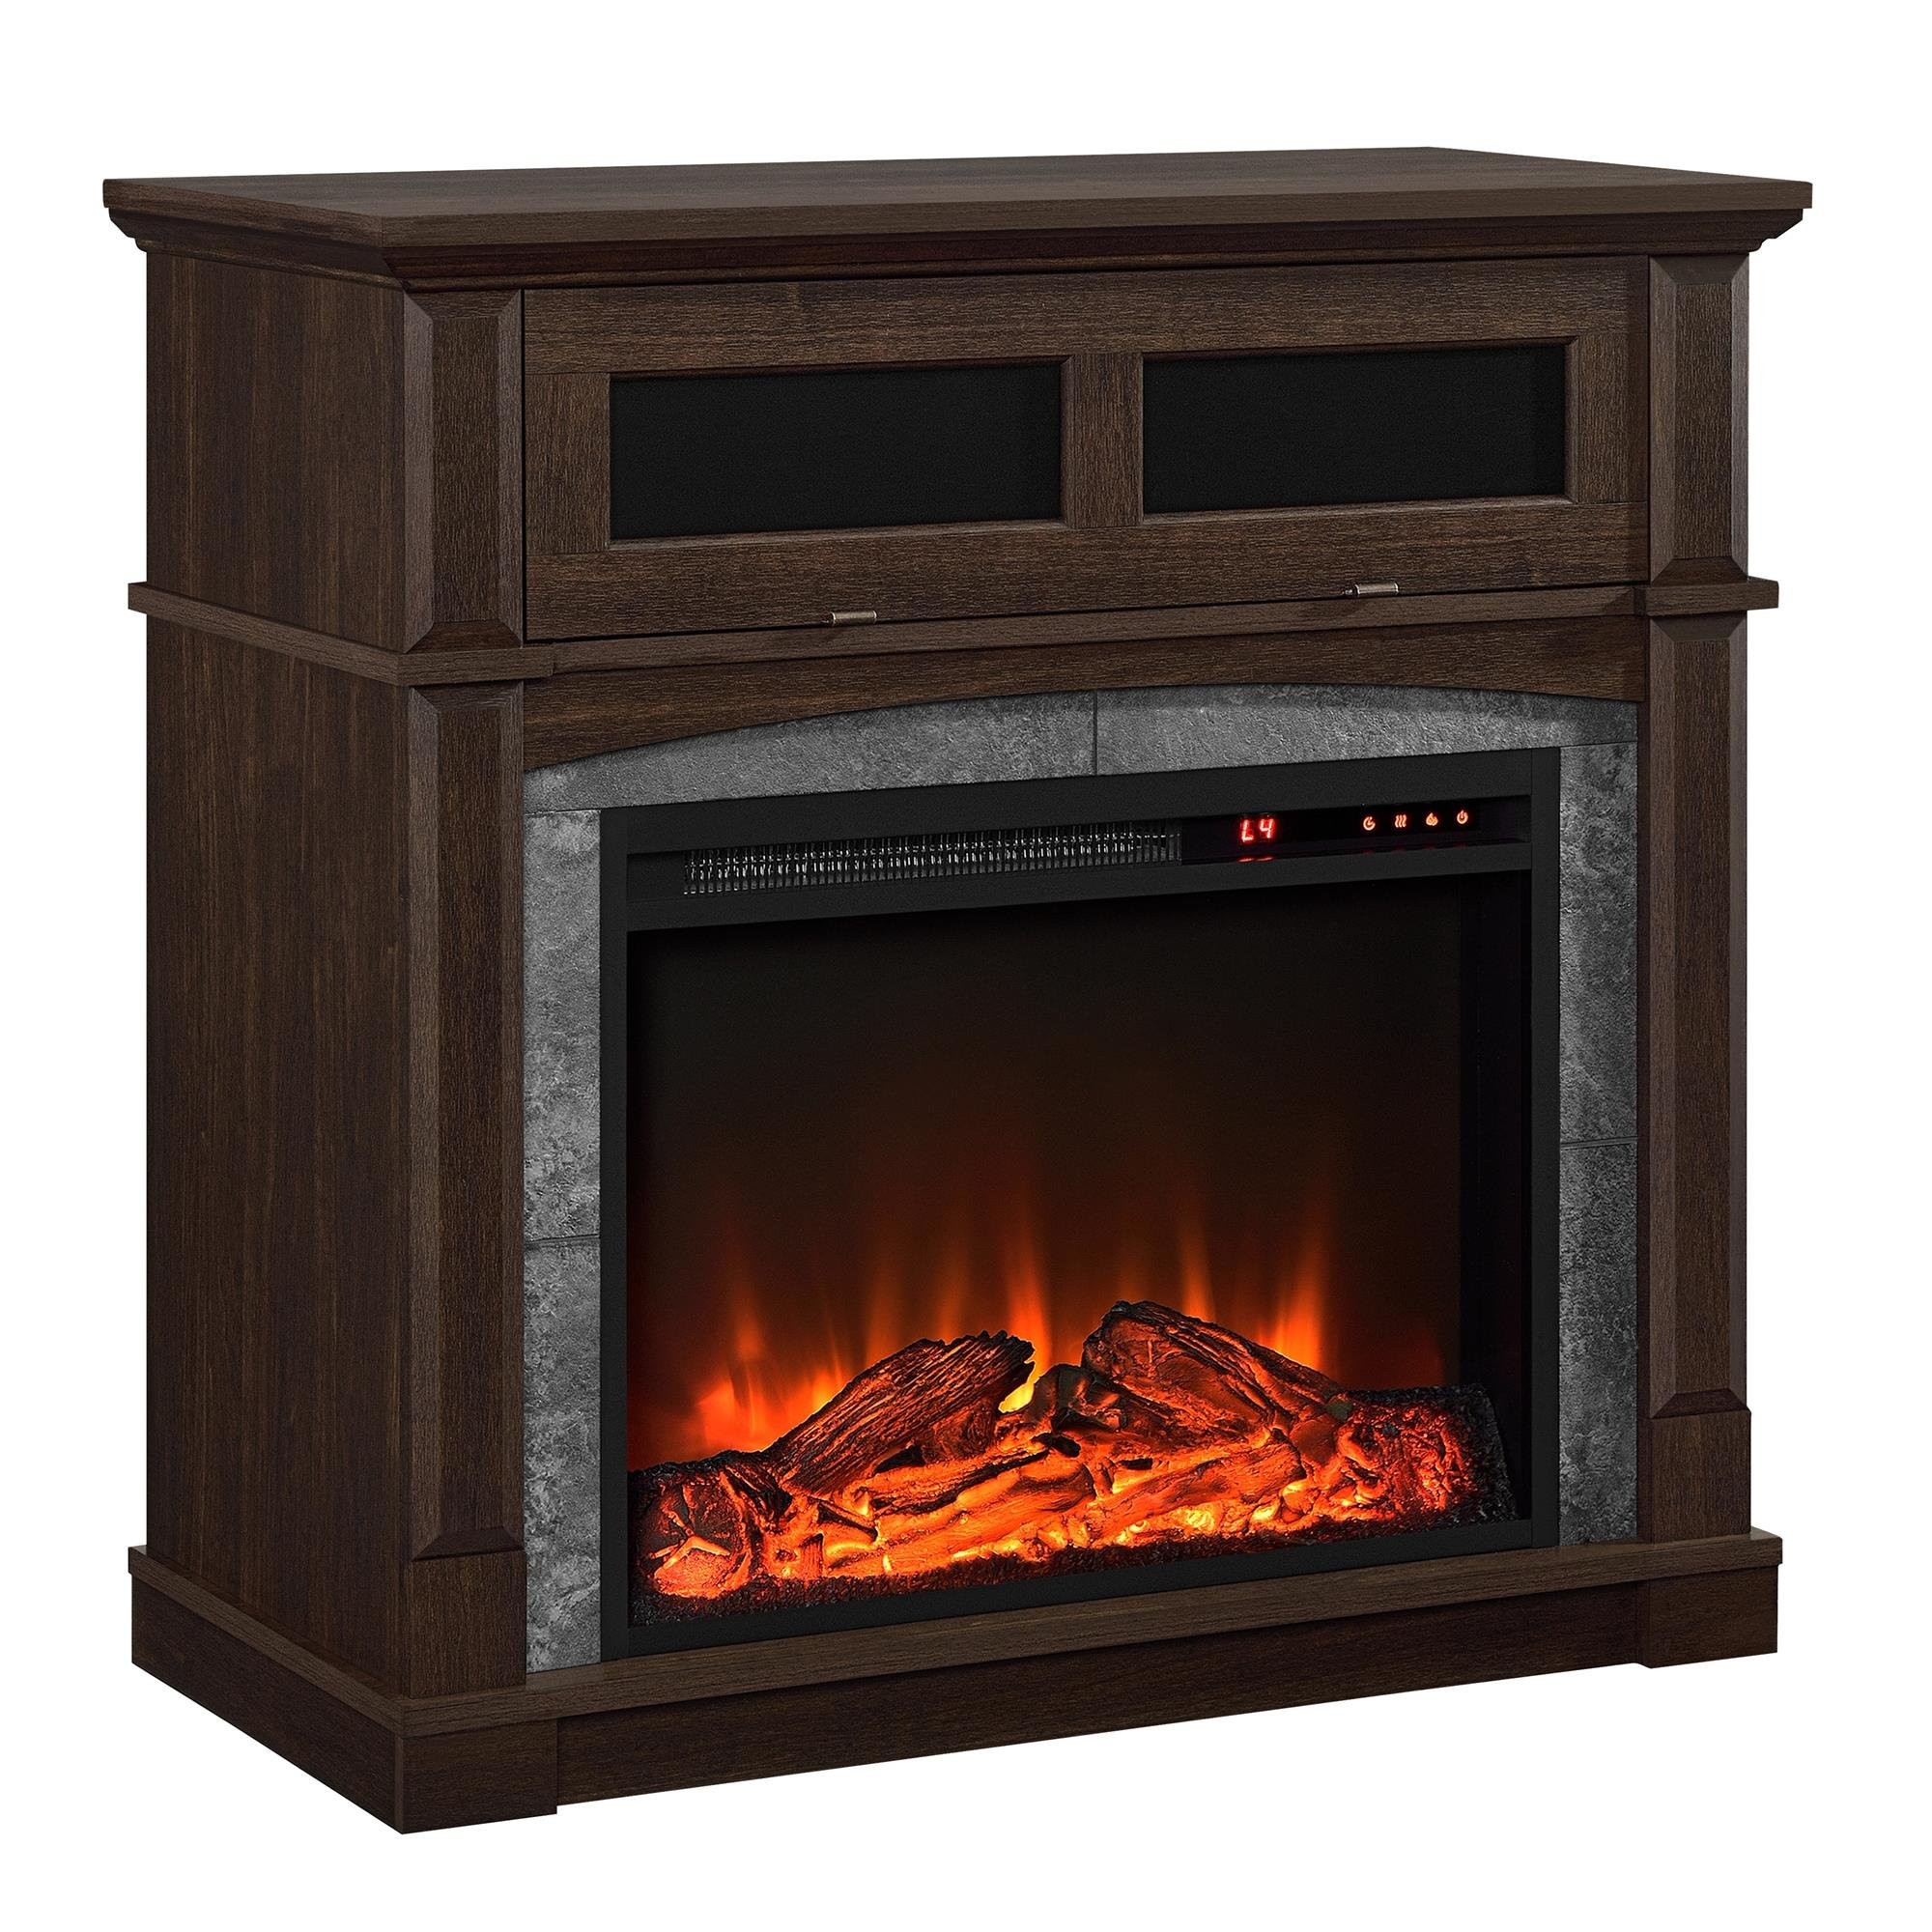 Small Electric Fireplace Tv Stand
 TV Stands with Electric Fireplace Amazon